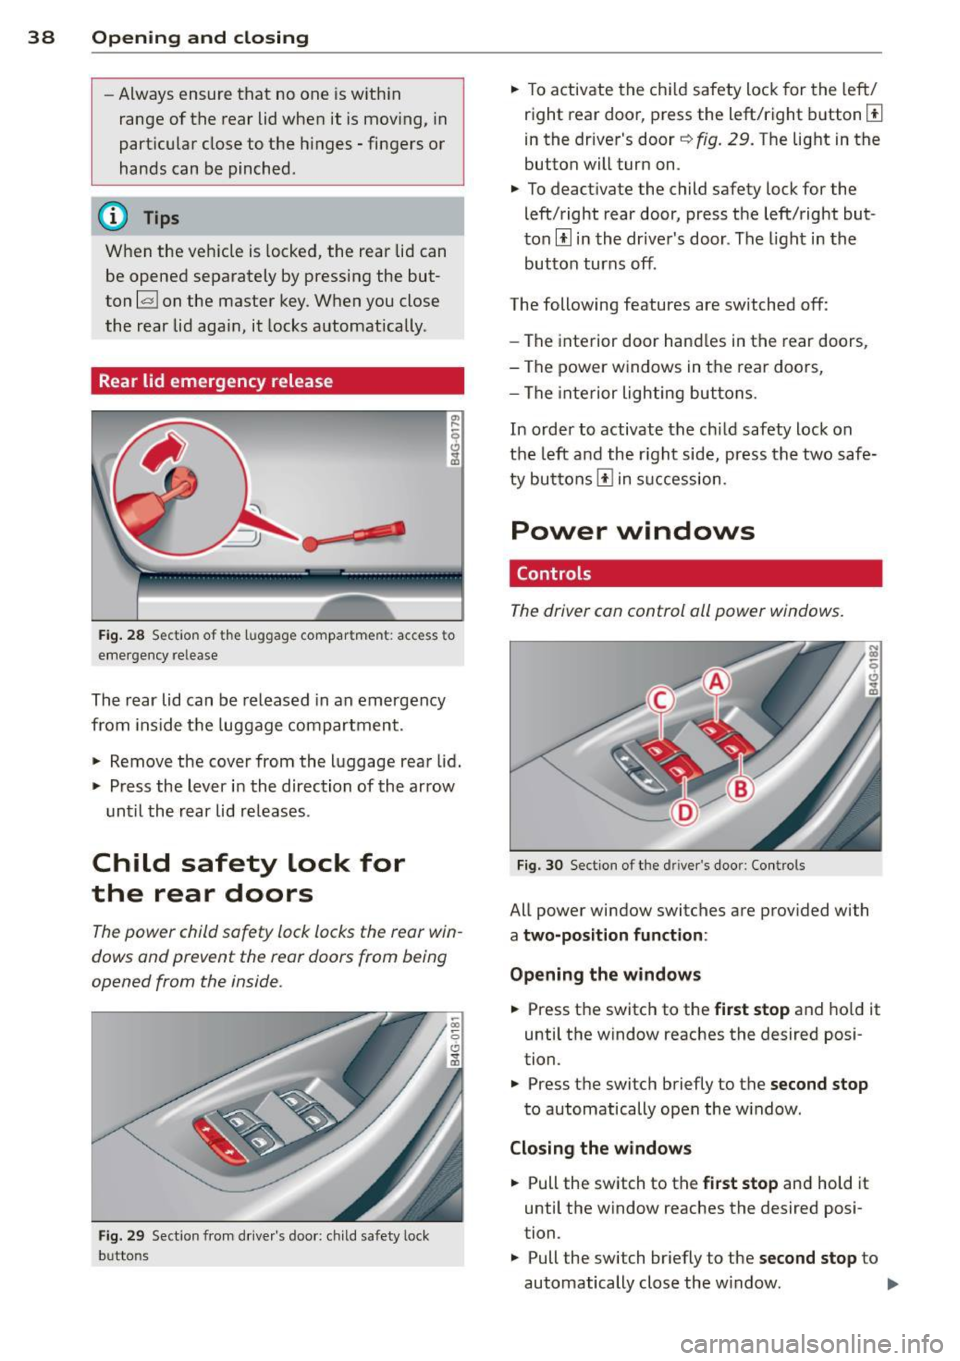 AUDI S6 2013  Owners Manual 38  Opening  and closing 
- Always  ensure  that  no  one  is within 
range  of the  rear  lid when 
it is mov ing,  in 
particular  close  to  the  hinges  - fingers  or 
hands  can  be  pinched. 
(D